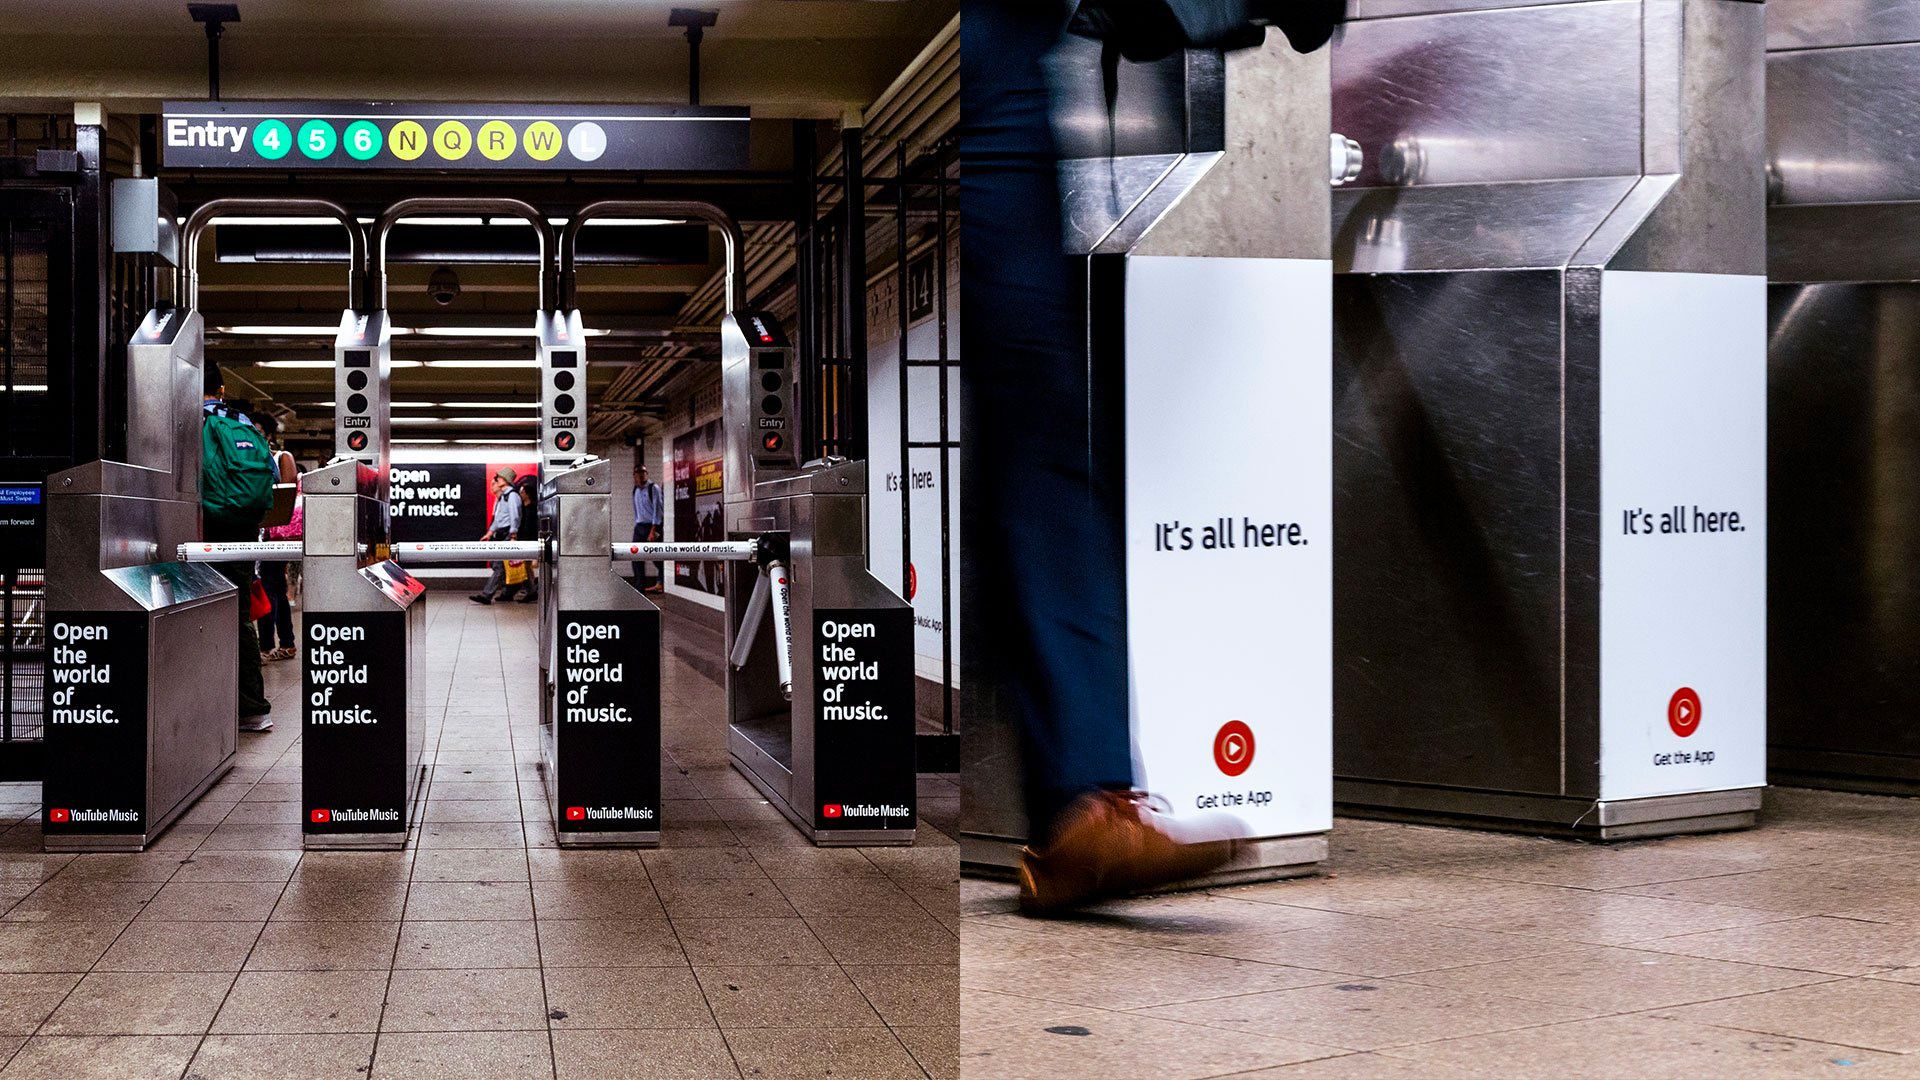 YouTube Music ads on turnstiles in Union Square. Open the world of music. It's all here.